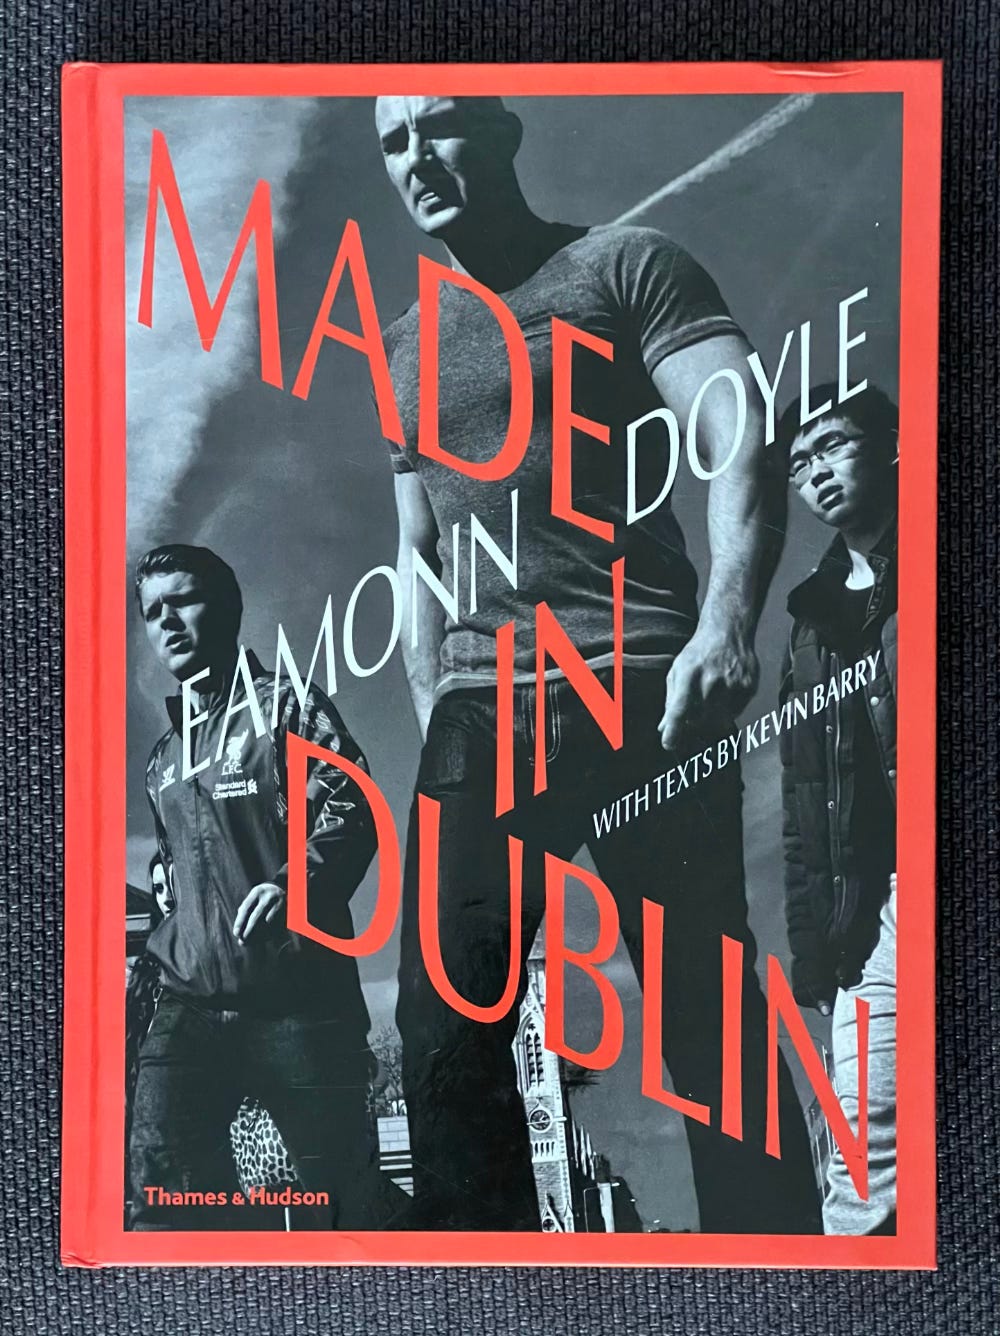 An image of the book Made in Dublin